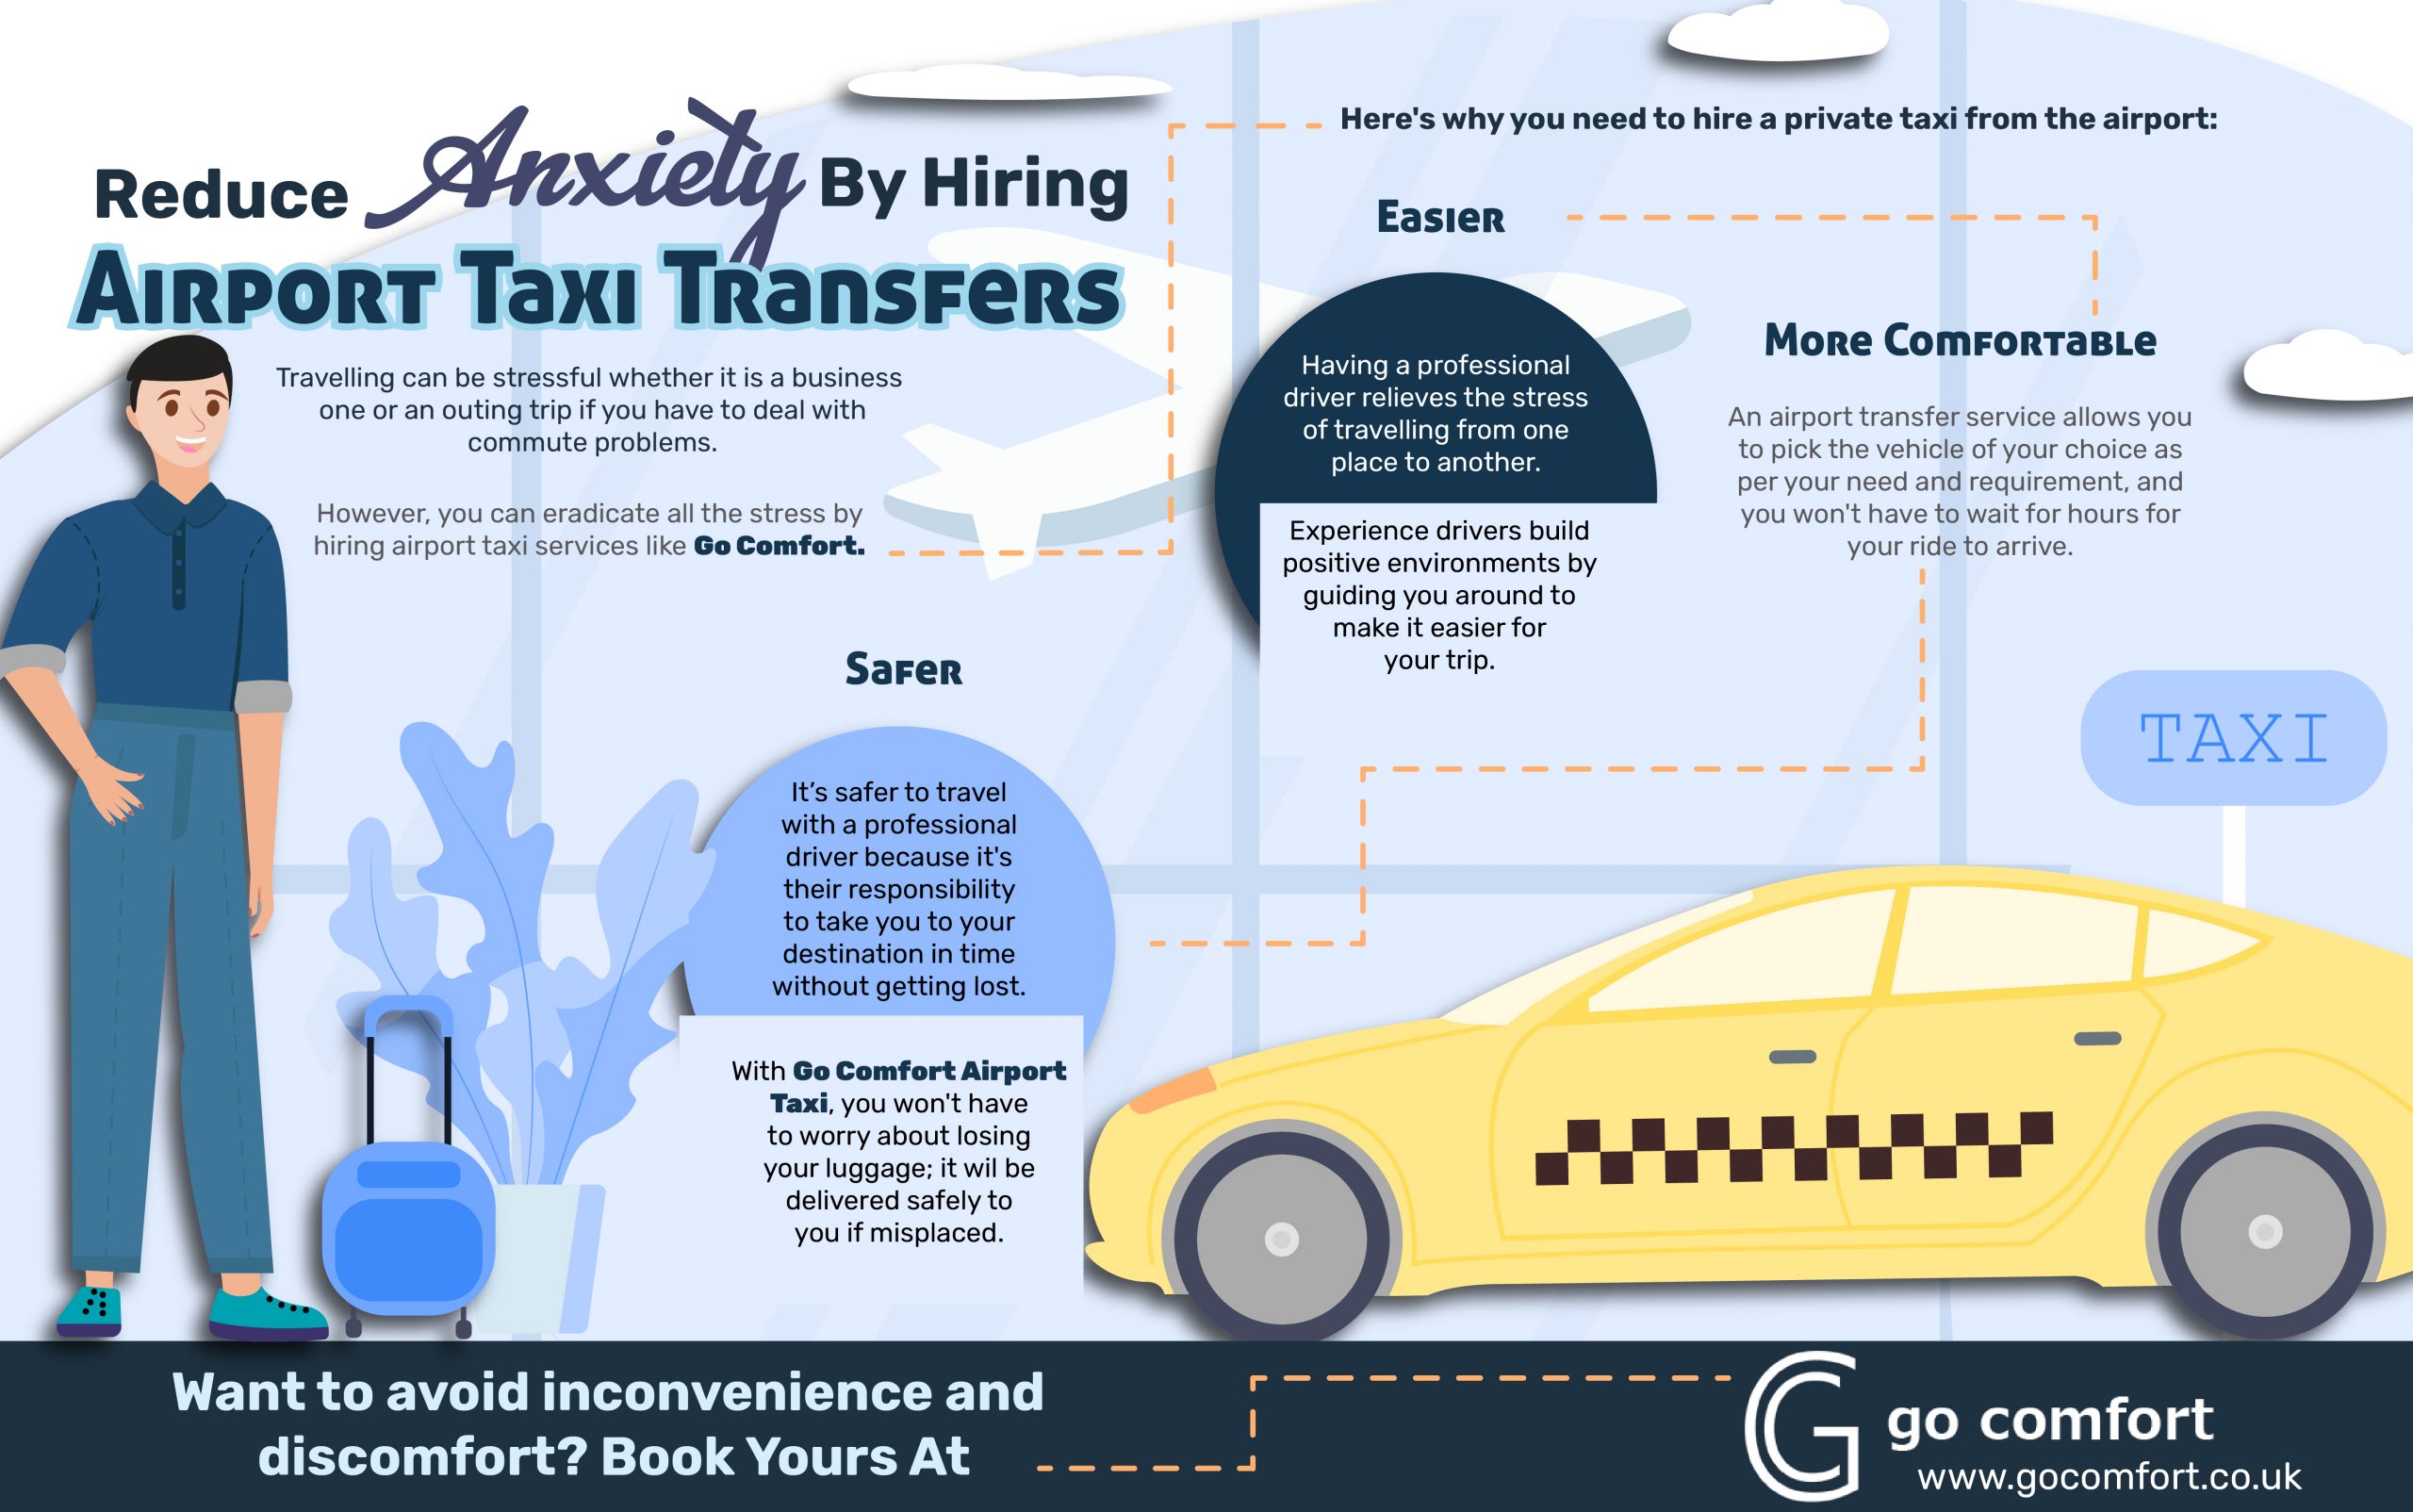 Reduce Anxiety By hiring Airport Taxi Transfers